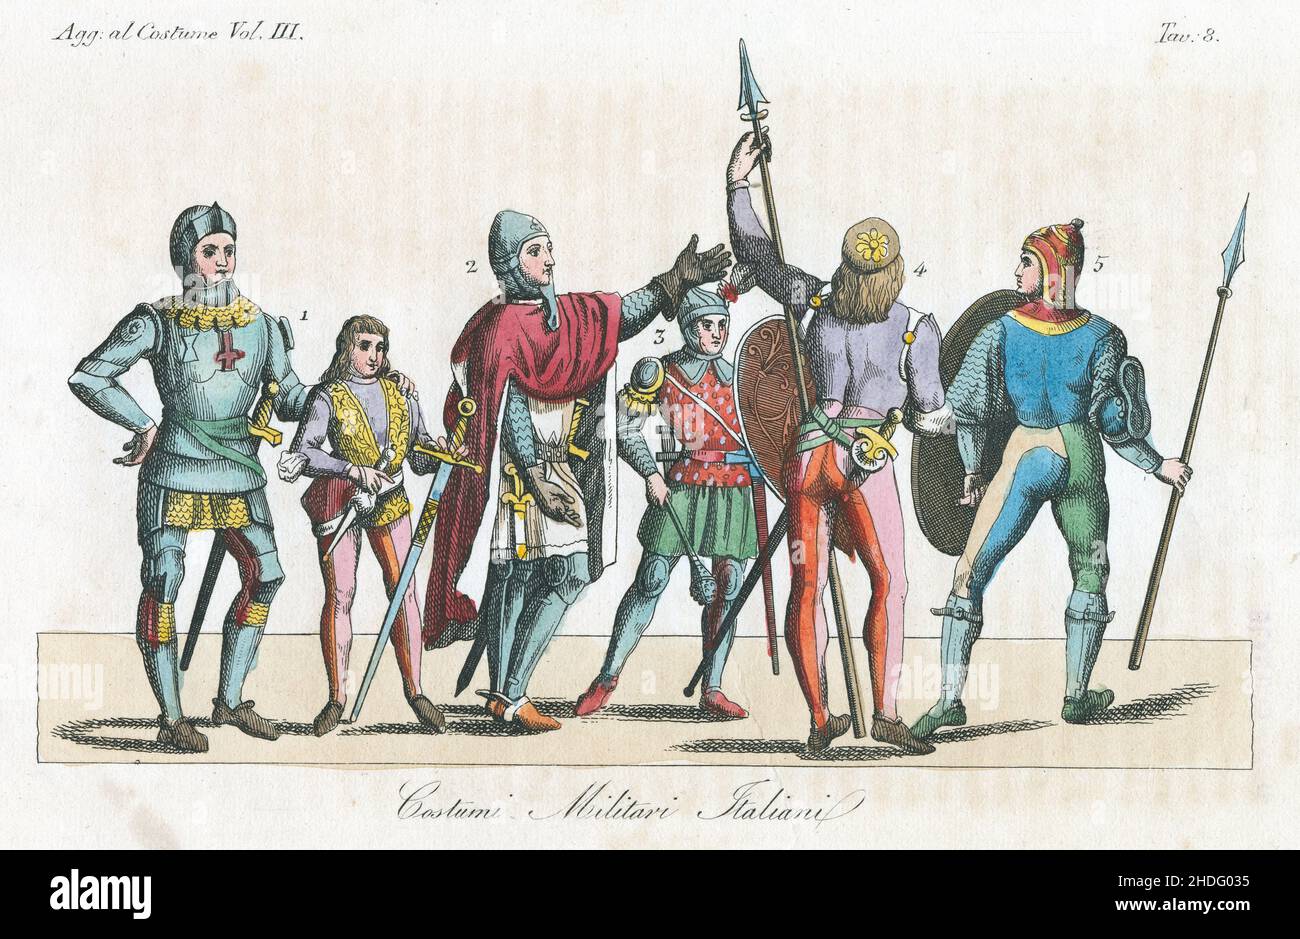 Antique c1830 hand-tinted engraving, 15th century Italian military uniforms. Published by Giulio Ferrario. SOURCE: ORIGINAL ENGRAVING Stock Photo